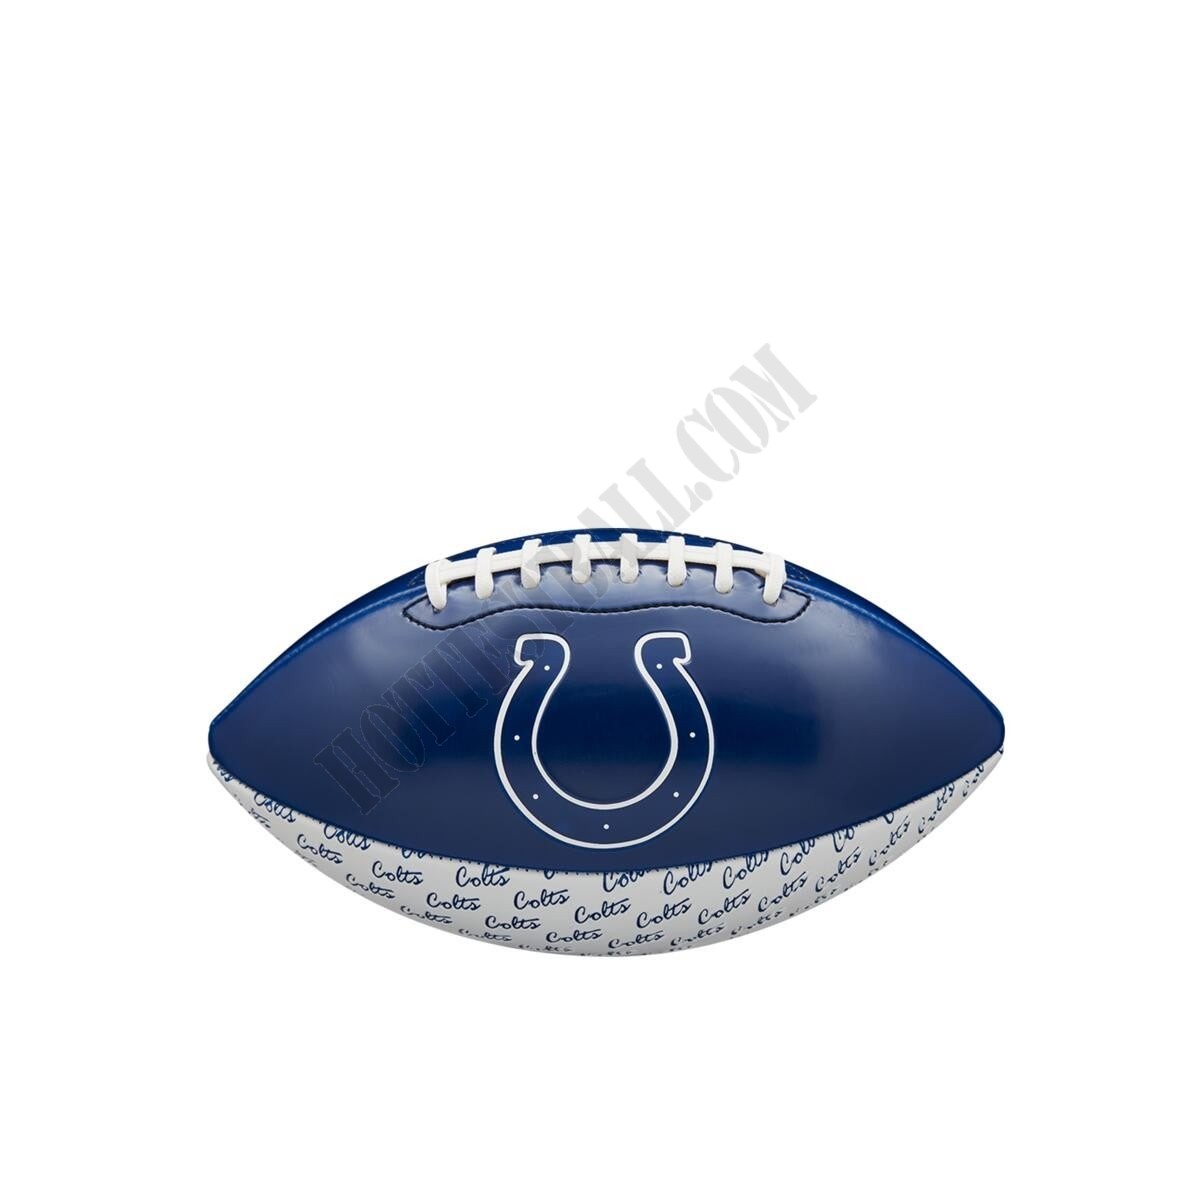 NFL City Pride Football - Indianapolis Colts ● Wilson Promotions - NFL City Pride Football - Indianapolis Colts ● Wilson Promotions